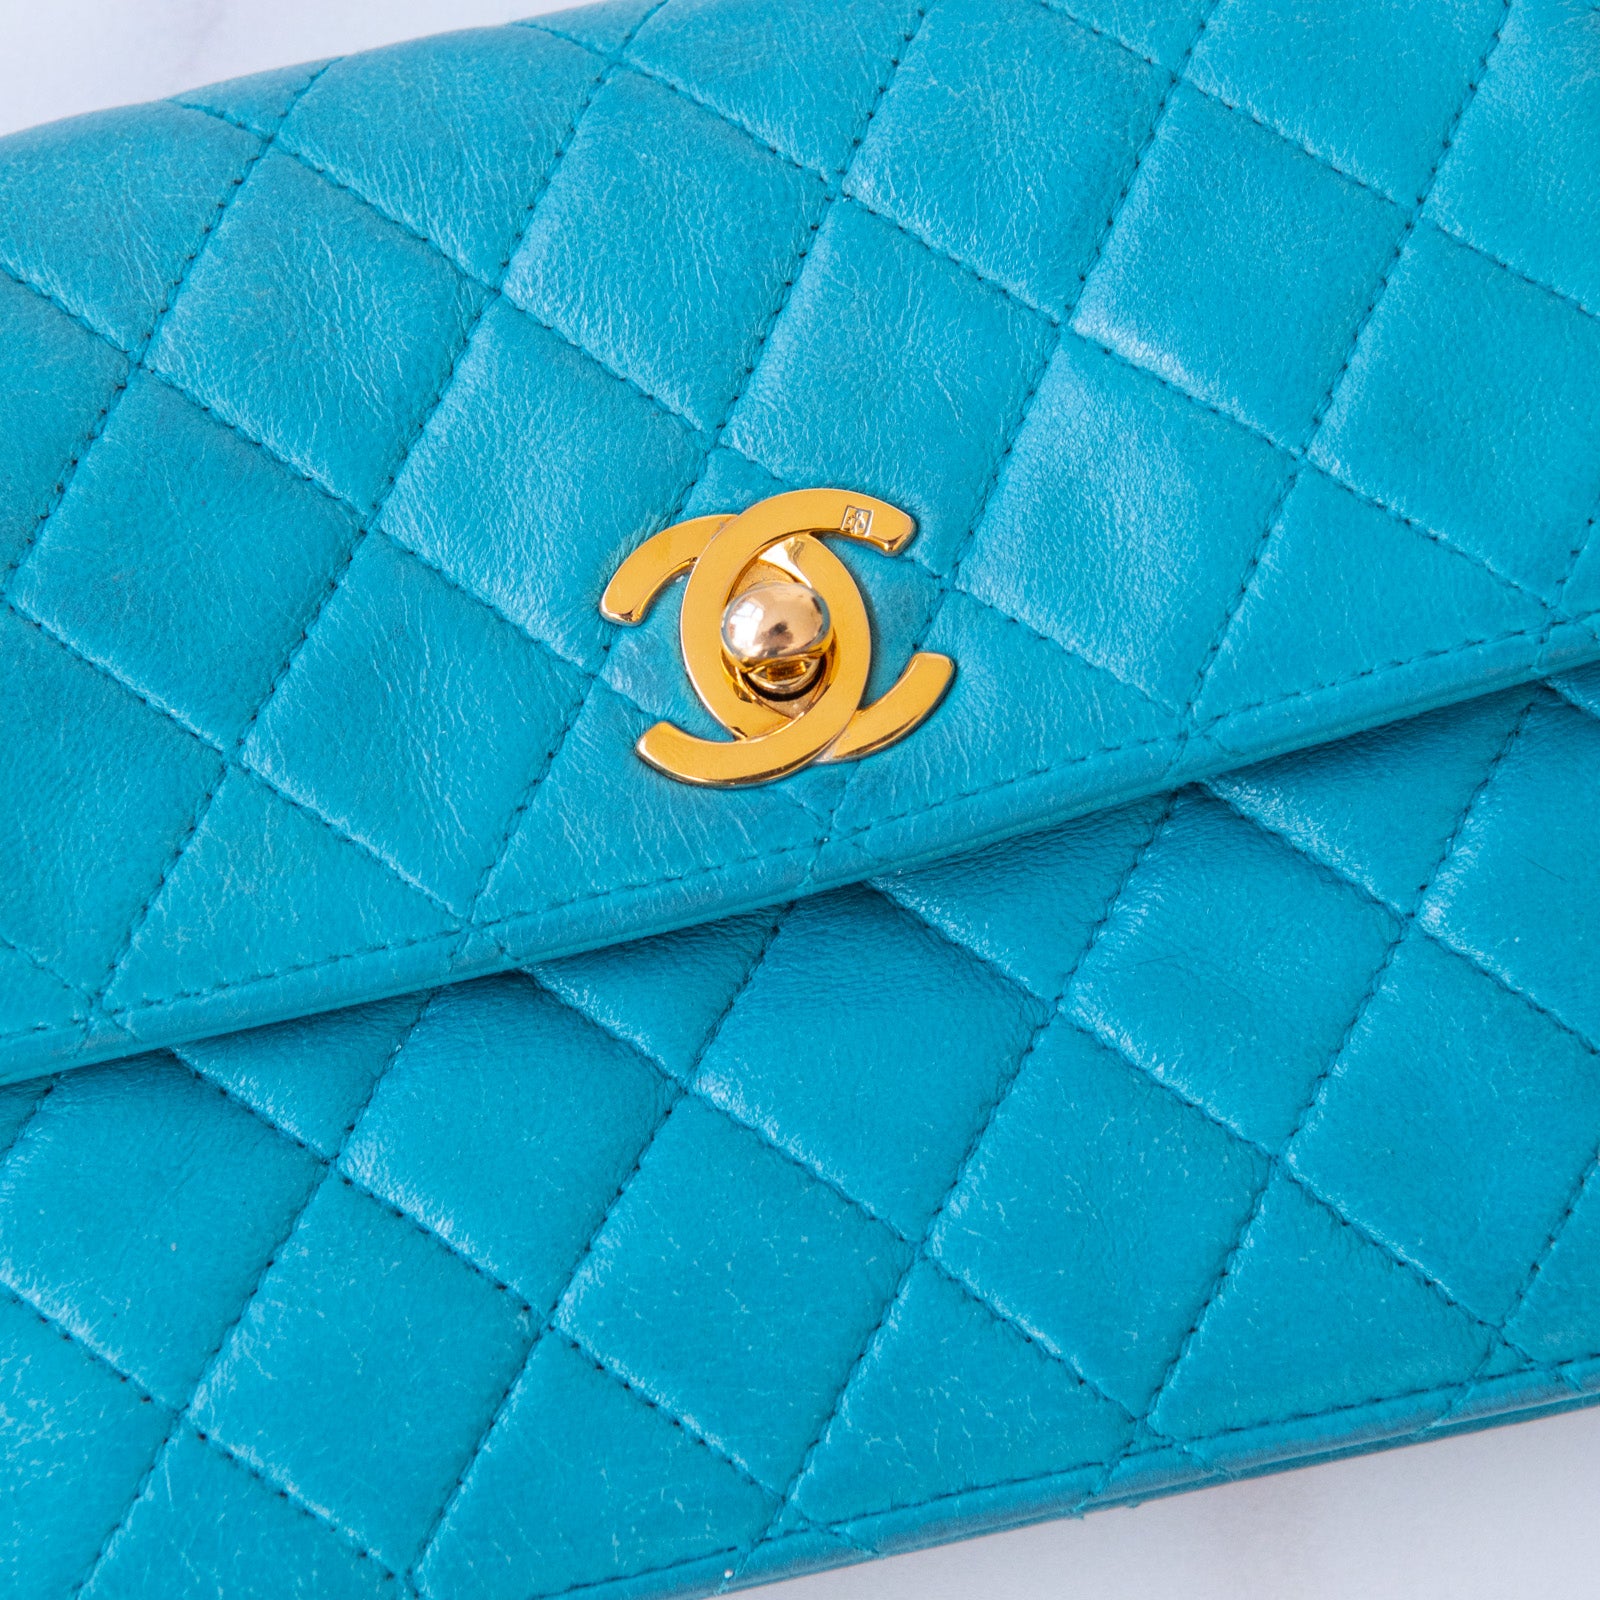 Chanel Turquoise Clutch On Chain Bag - Image 5 of 9